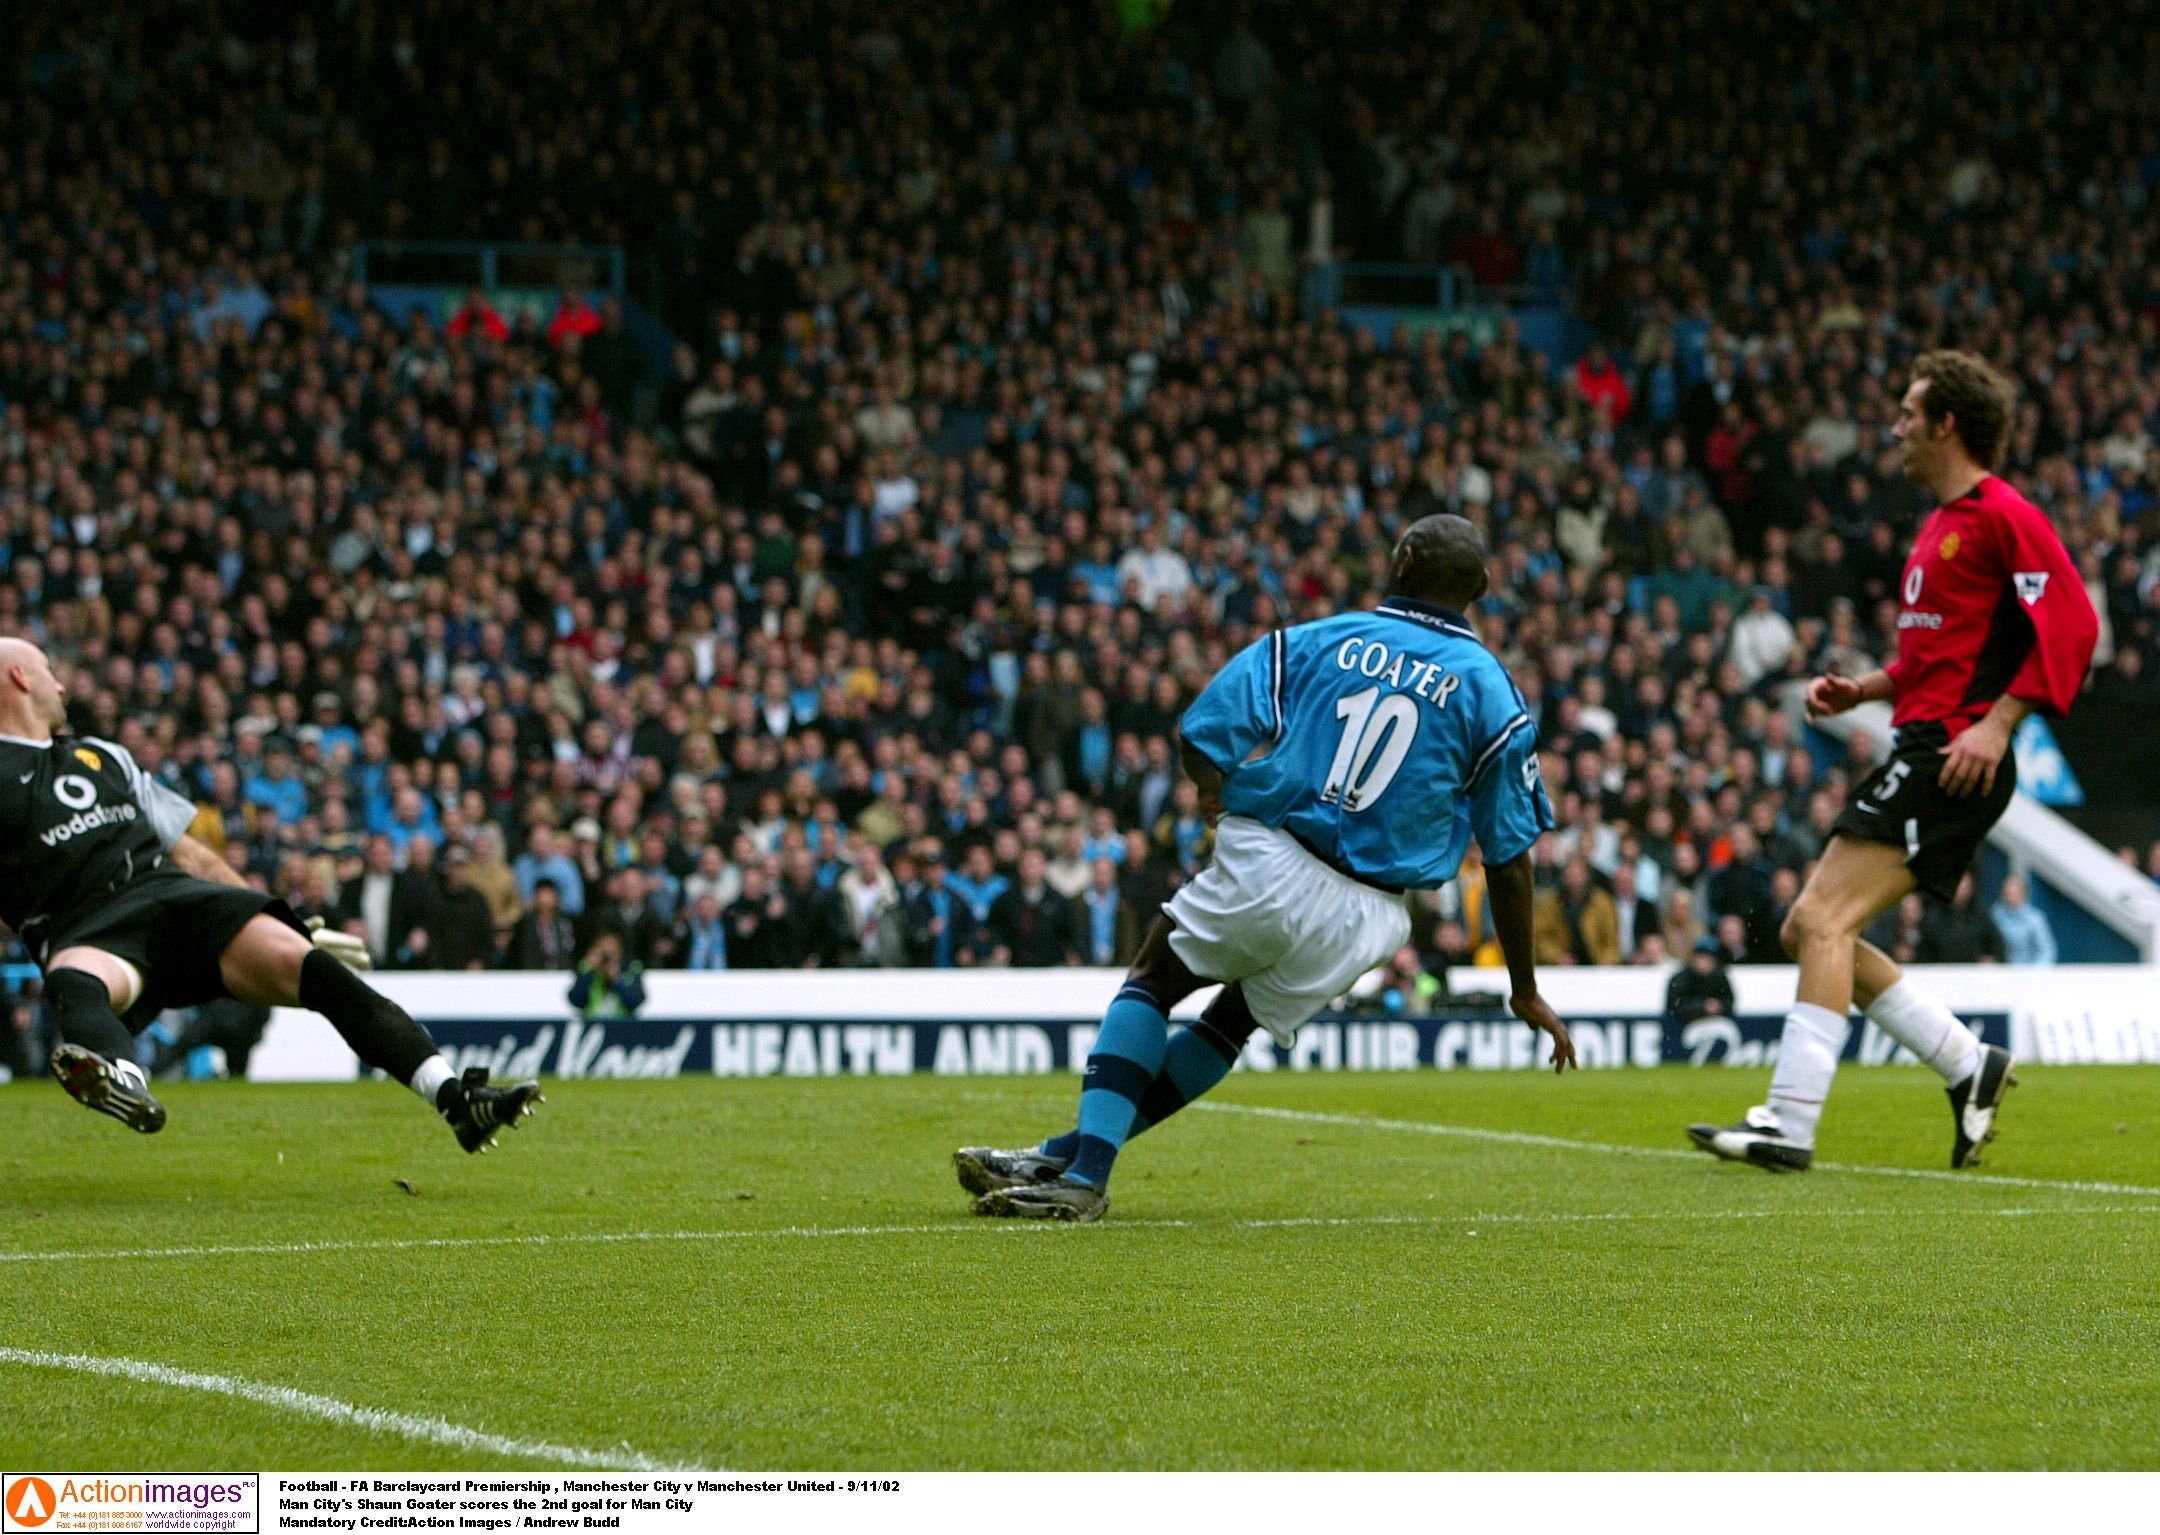 Football - FA Barclaycard Premiership , Manchester City v Manchester United - 9/11/02 
Man City's Shaun Goater scores the 2nd goal for Man City 
Mandatory Credit:Action Images / Andrew Budd